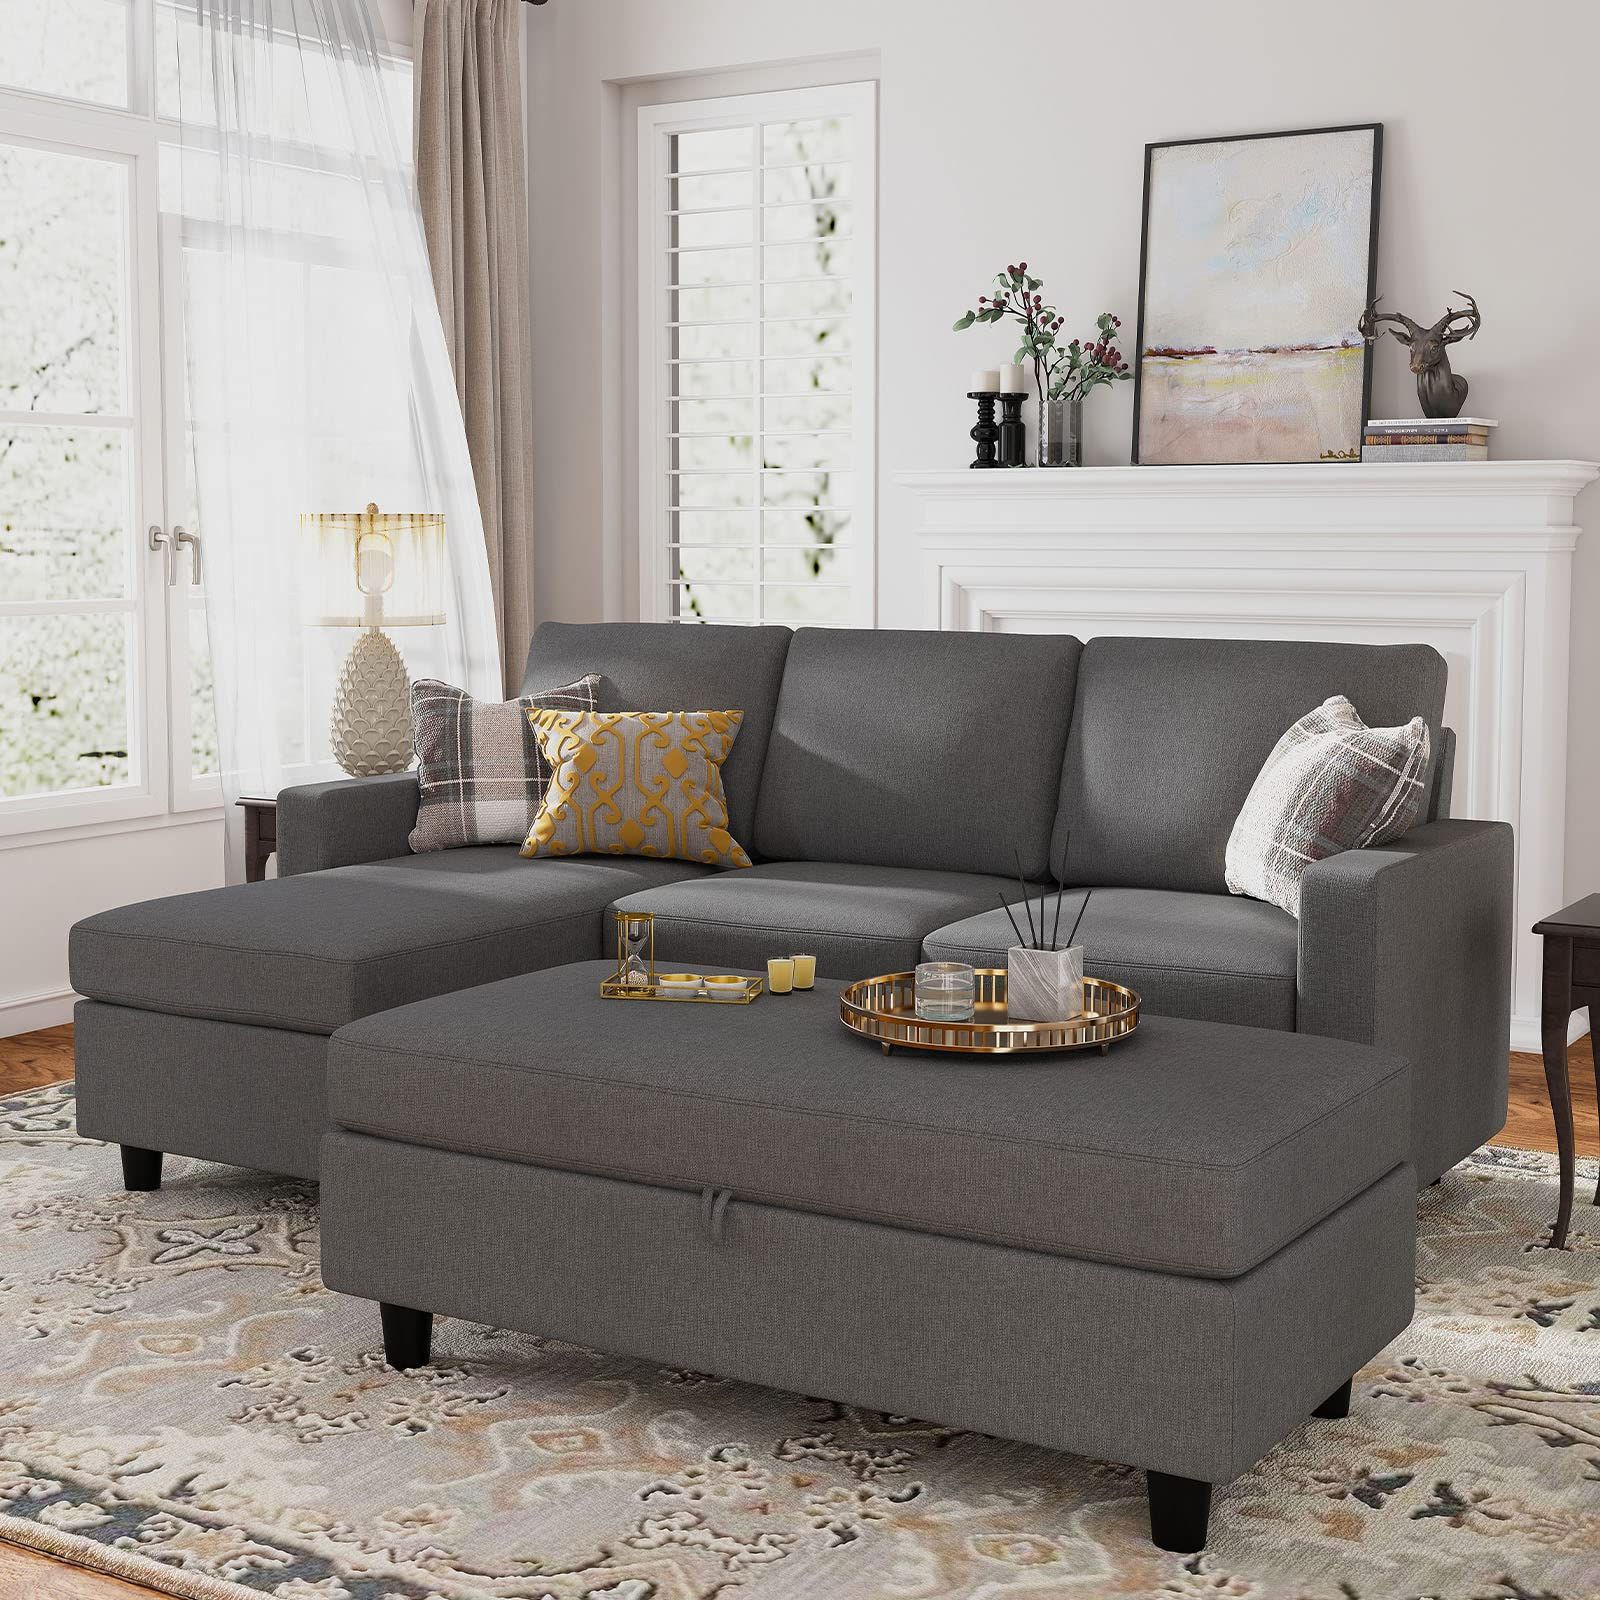 Honbay Reversible Sectional Couch With Ottoman L Shaped Sofa For Small Regarding Most Up To Date L Shape Couches With Reversible Chaises (View 7 of 15)